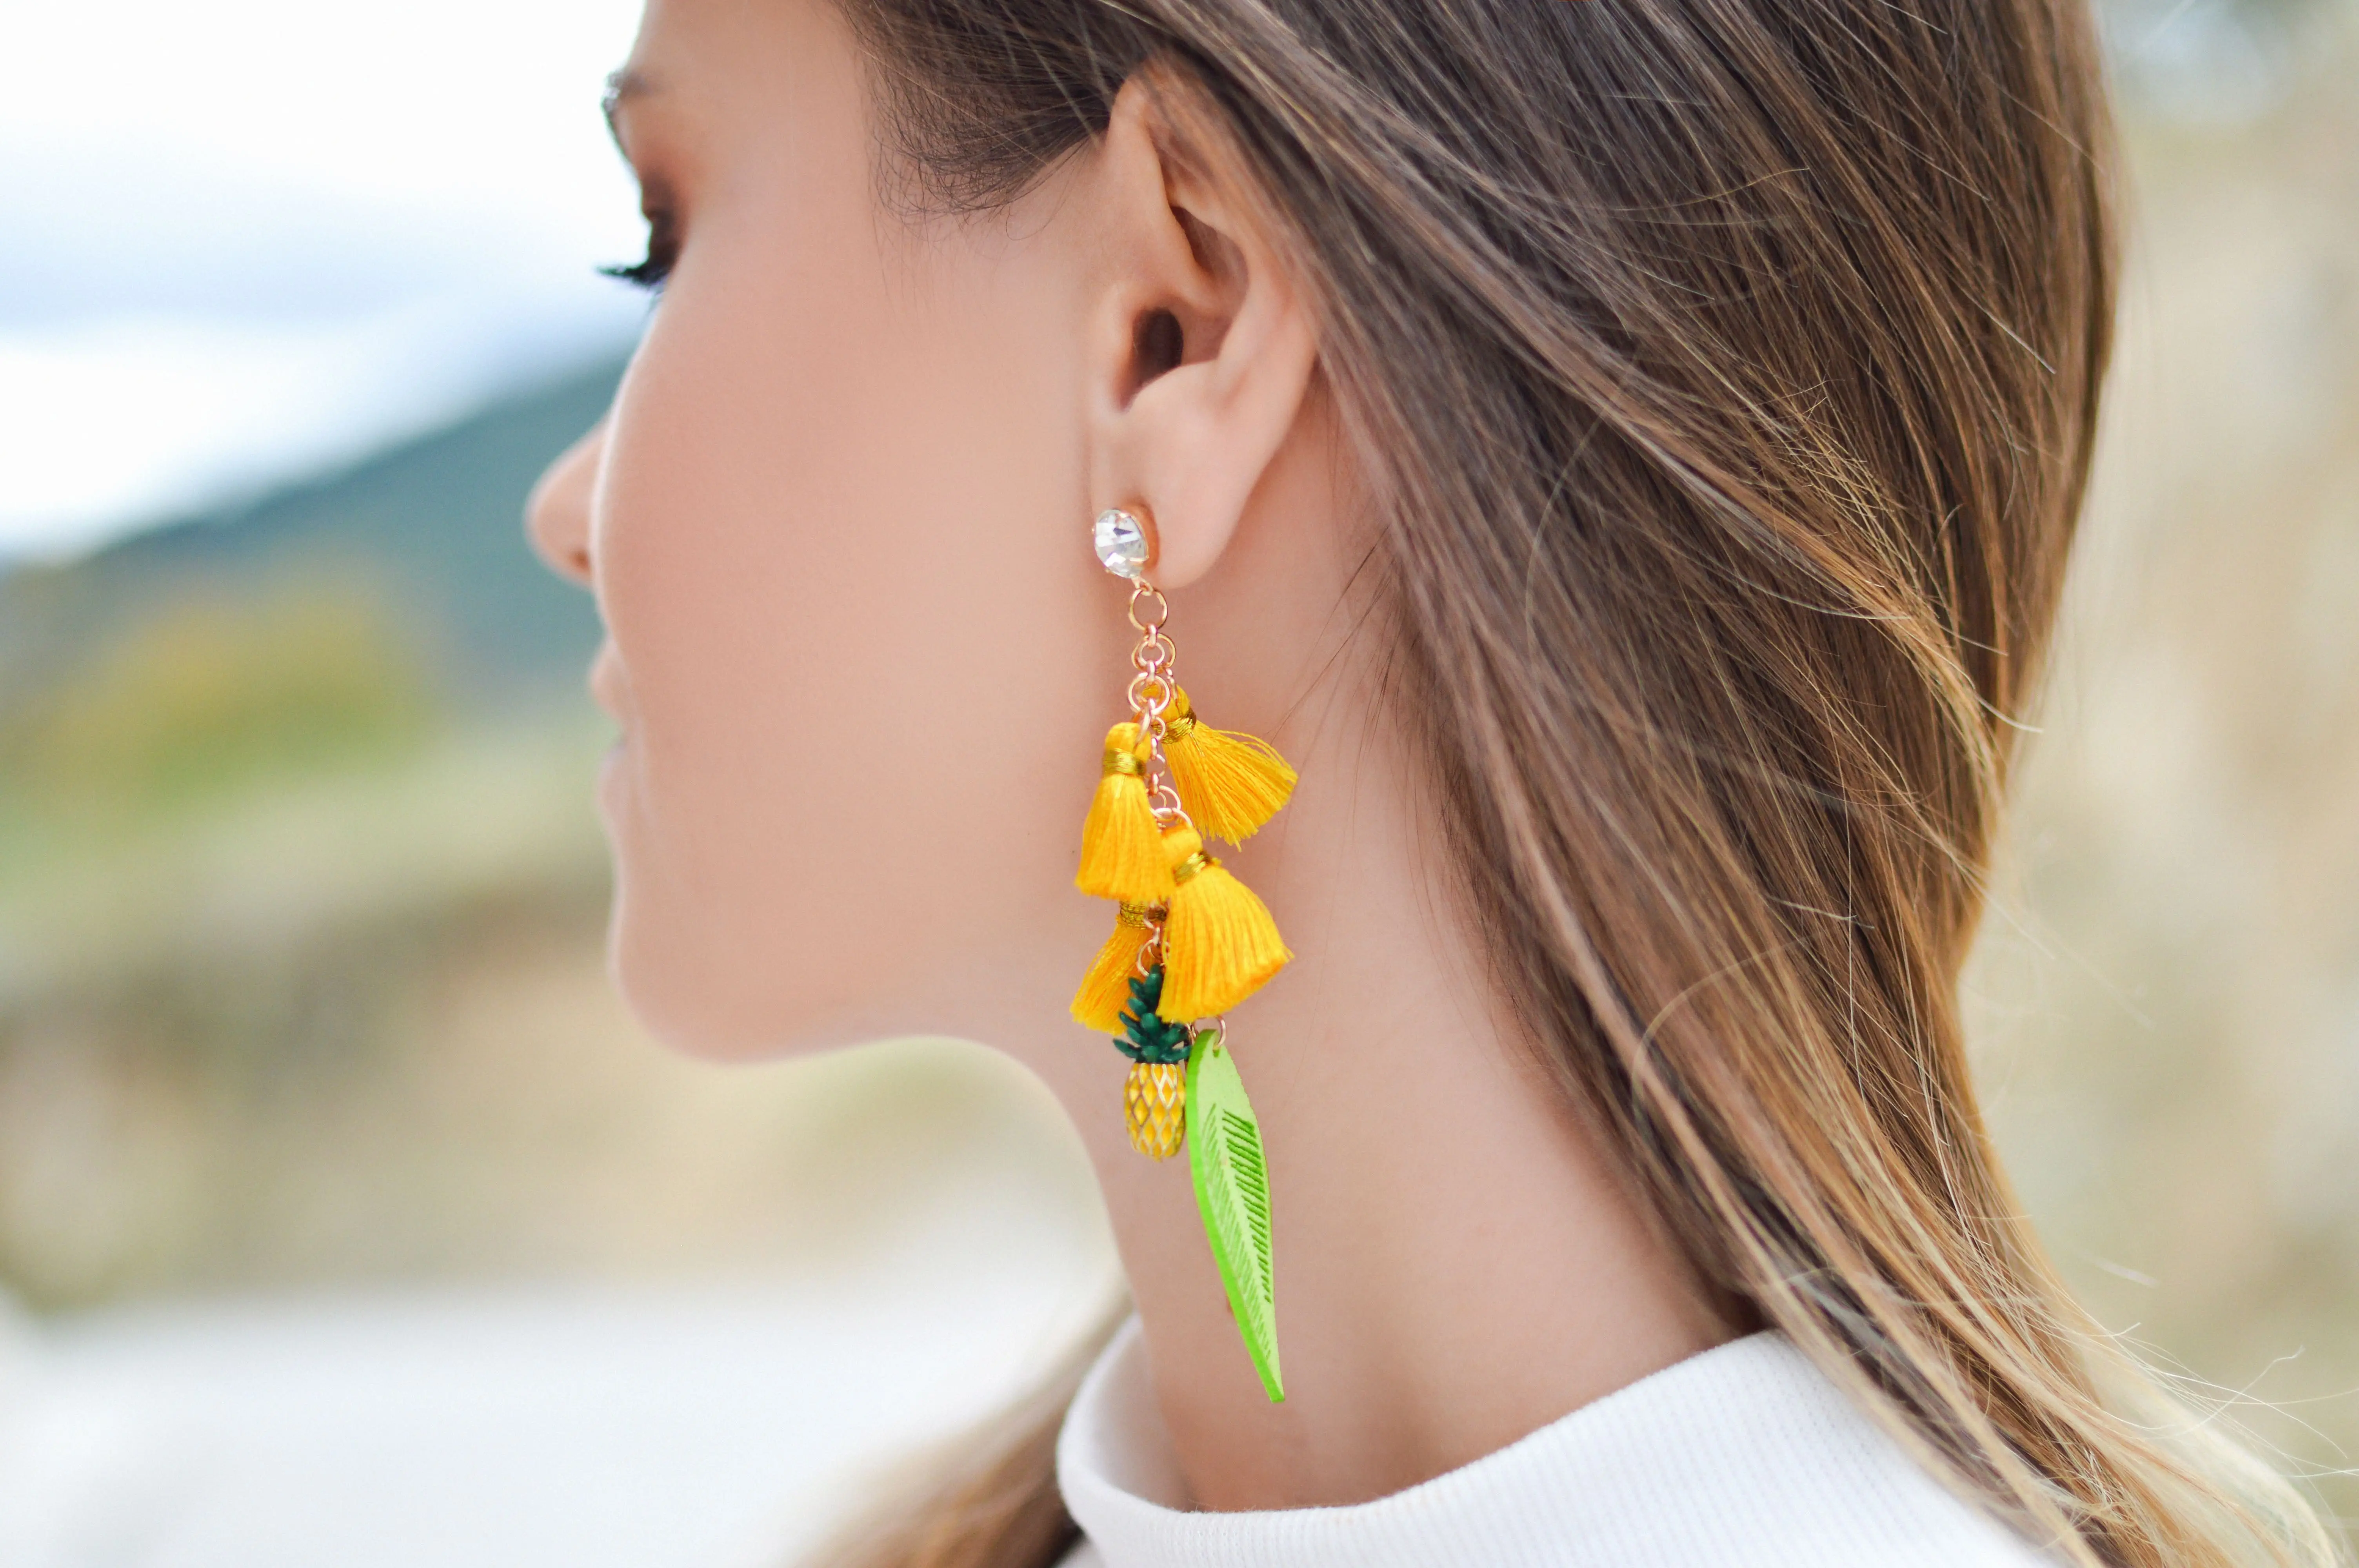 Woman with long earrings in yellow and green